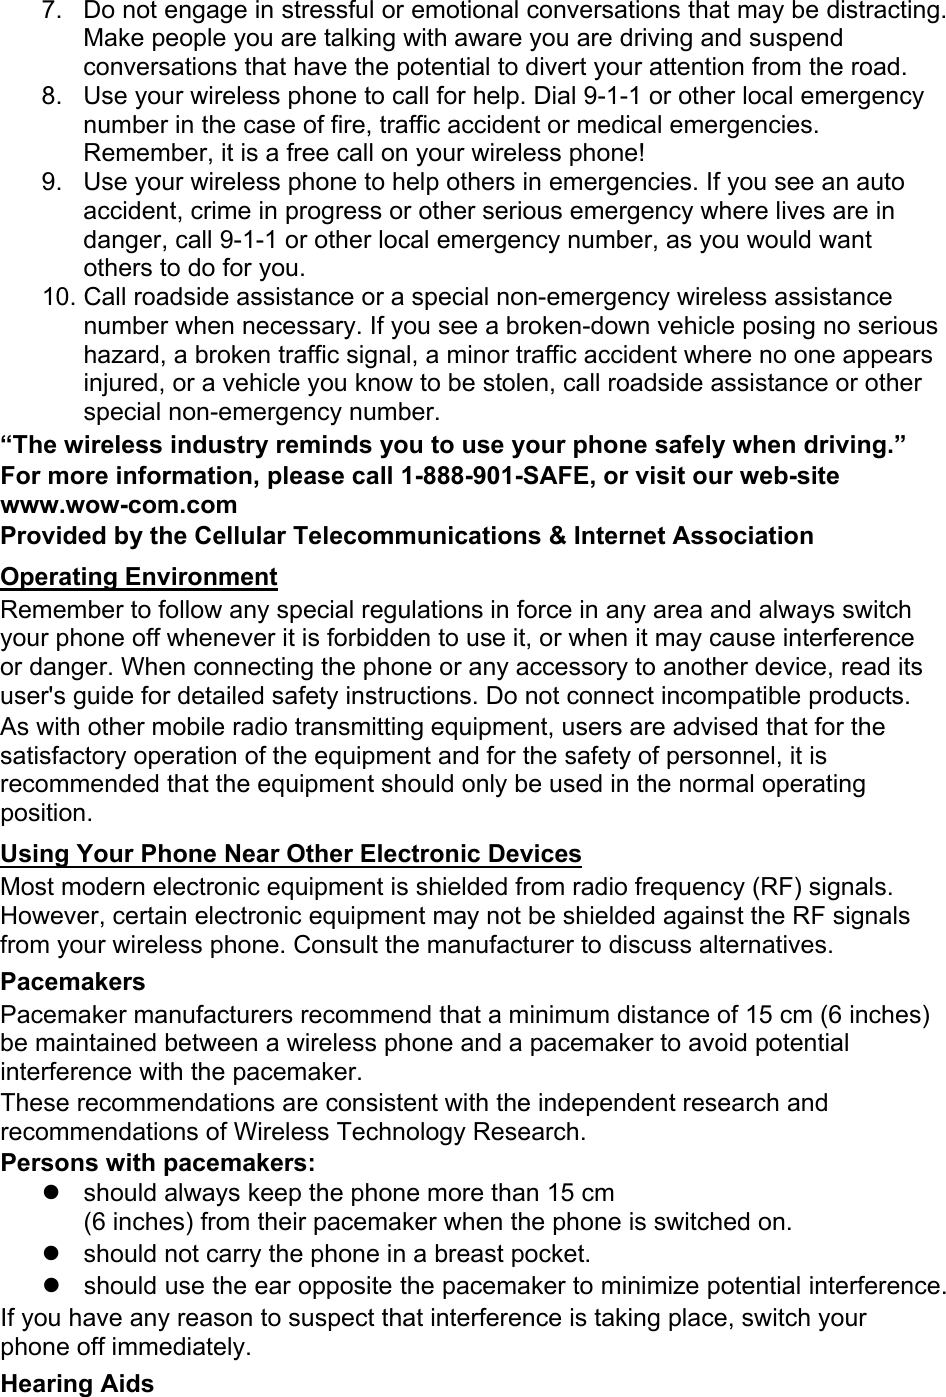 7.  Do not engage in stressful or emotional conversations that may be distracting. Make people you are talking with aware you are driving and suspend conversations that have the potential to divert your attention from the road. 8.  Use your wireless phone to call for help. Dial 9-1-1 or other local emergency number in the case of fire, traffic accident or medical emergencies. Remember, it is a free call on your wireless phone! 9.  Use your wireless phone to help others in emergencies. If you see an auto accident, crime in progress or other serious emergency where lives are in danger, call 9-1-1 or other local emergency number, as you would want others to do for you. 10. Call roadside assistance or a special non-emergency wireless assistance number when necessary. If you see a broken-down vehicle posing no serious hazard, a broken traffic signal, a minor traffic accident where no one appears injured, or a vehicle you know to be stolen, call roadside assistance or other special non-emergency number. “The wireless industry reminds you to use your phone safely when driving.” For more information, please call 1-888-901-SAFE, or visit our web-site www.wow-com.com Provided by the Cellular Telecommunications &amp; Internet Association Operating Environment Remember to follow any special regulations in force in any area and always switch your phone off whenever it is forbidden to use it, or when it may cause interference or danger. When connecting the phone or any accessory to another device, read its user&apos;s guide for detailed safety instructions. Do not connect incompatible products.As with other mobile radio transmitting equipment, users are advised that for the satisfactory operation of the equipment and for the safety of personnel, it is recommended that the equipment should only be used in the normal operating position. Using Your Phone Near Other Electronic Devices Most modern electronic equipment is shielded from radio frequency (RF) signals. However, certain electronic equipment may not be shielded against the RF signals from your wireless phone. Consult the manufacturer to discuss alternatives. Pacemakers Pacemaker manufacturers recommend that a minimum distance of 15 cm (6 inches) be maintained between a wireless phone and a pacemaker to avoid potential interference with the pacemaker. These recommendations are consistent with the independent research and recommendations of Wireless Technology Research. Persons with pacemakers:   should always keep the phone more than 15 cm   (6 inches) from their pacemaker when the phone is switched on.   should not carry the phone in a breast pocket.   should use the ear opposite the pacemaker to minimize potential interference. If you have any reason to suspect that interference is taking place, switch your phone off immediately. Hearing Aids 